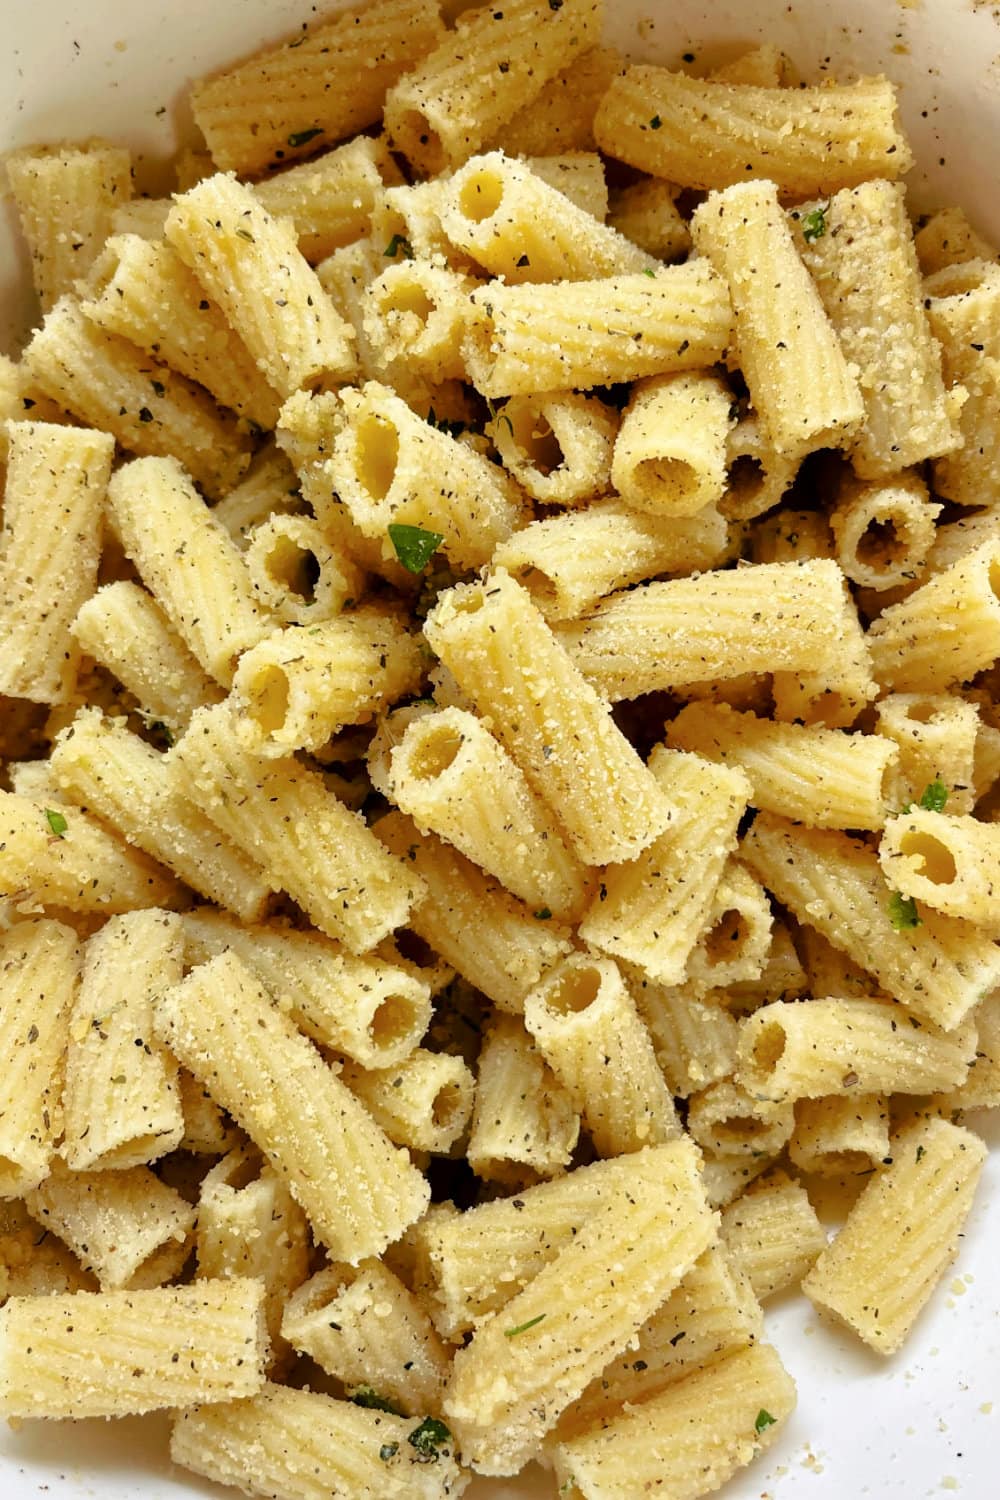 Cooked rigatoni that has been tossed with a Parmesan seasoning. 